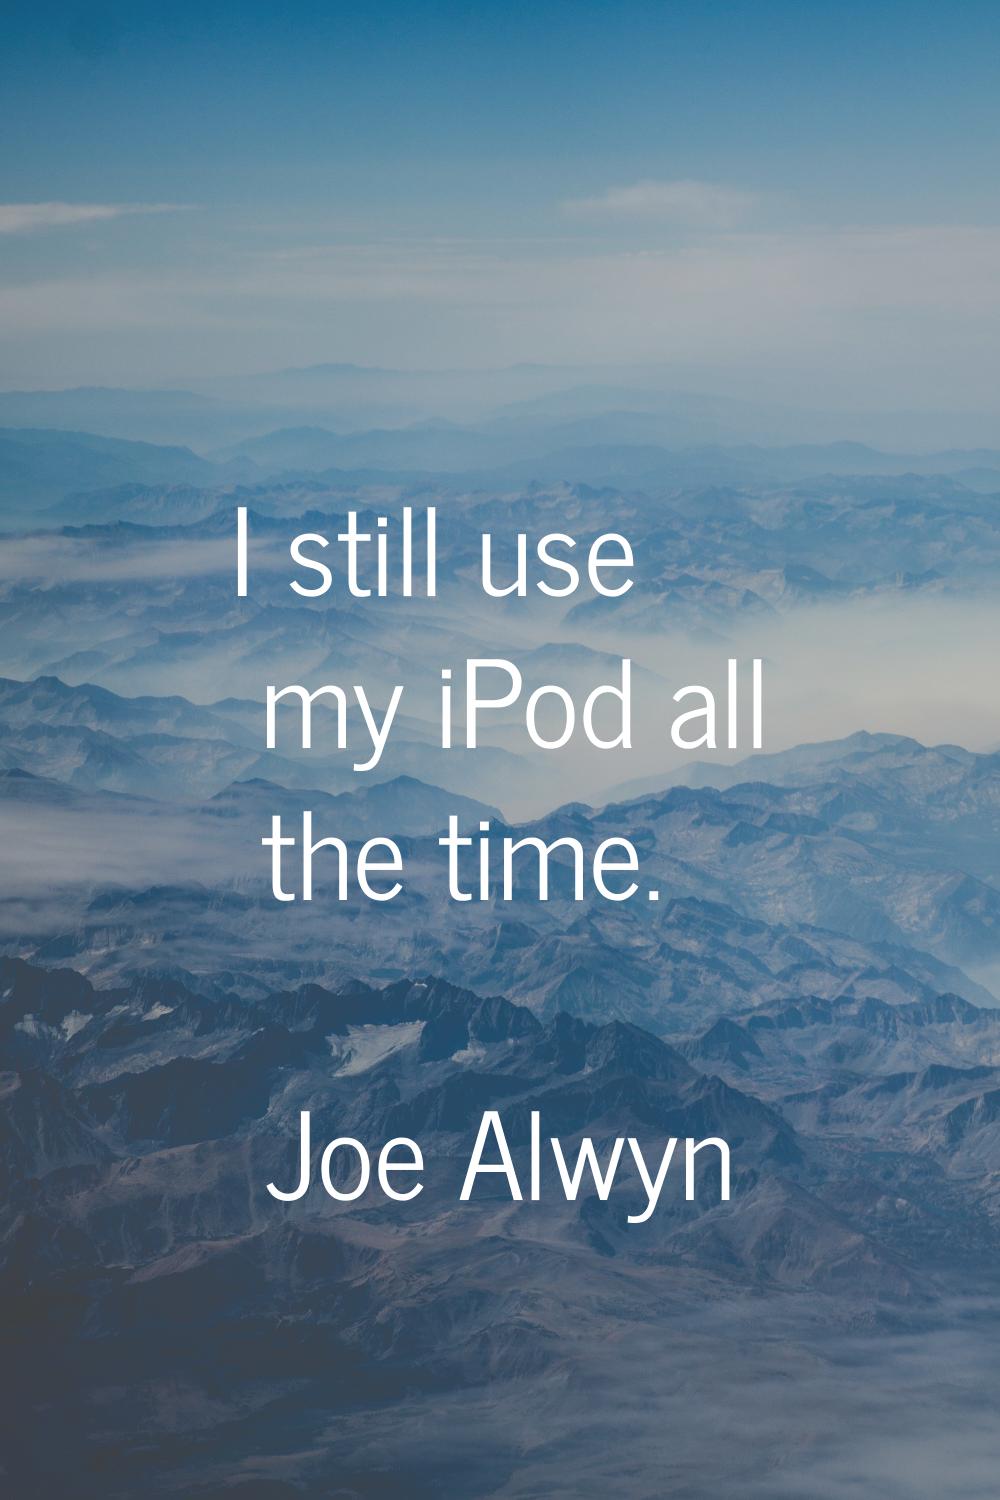 I still use my iPod all the time.